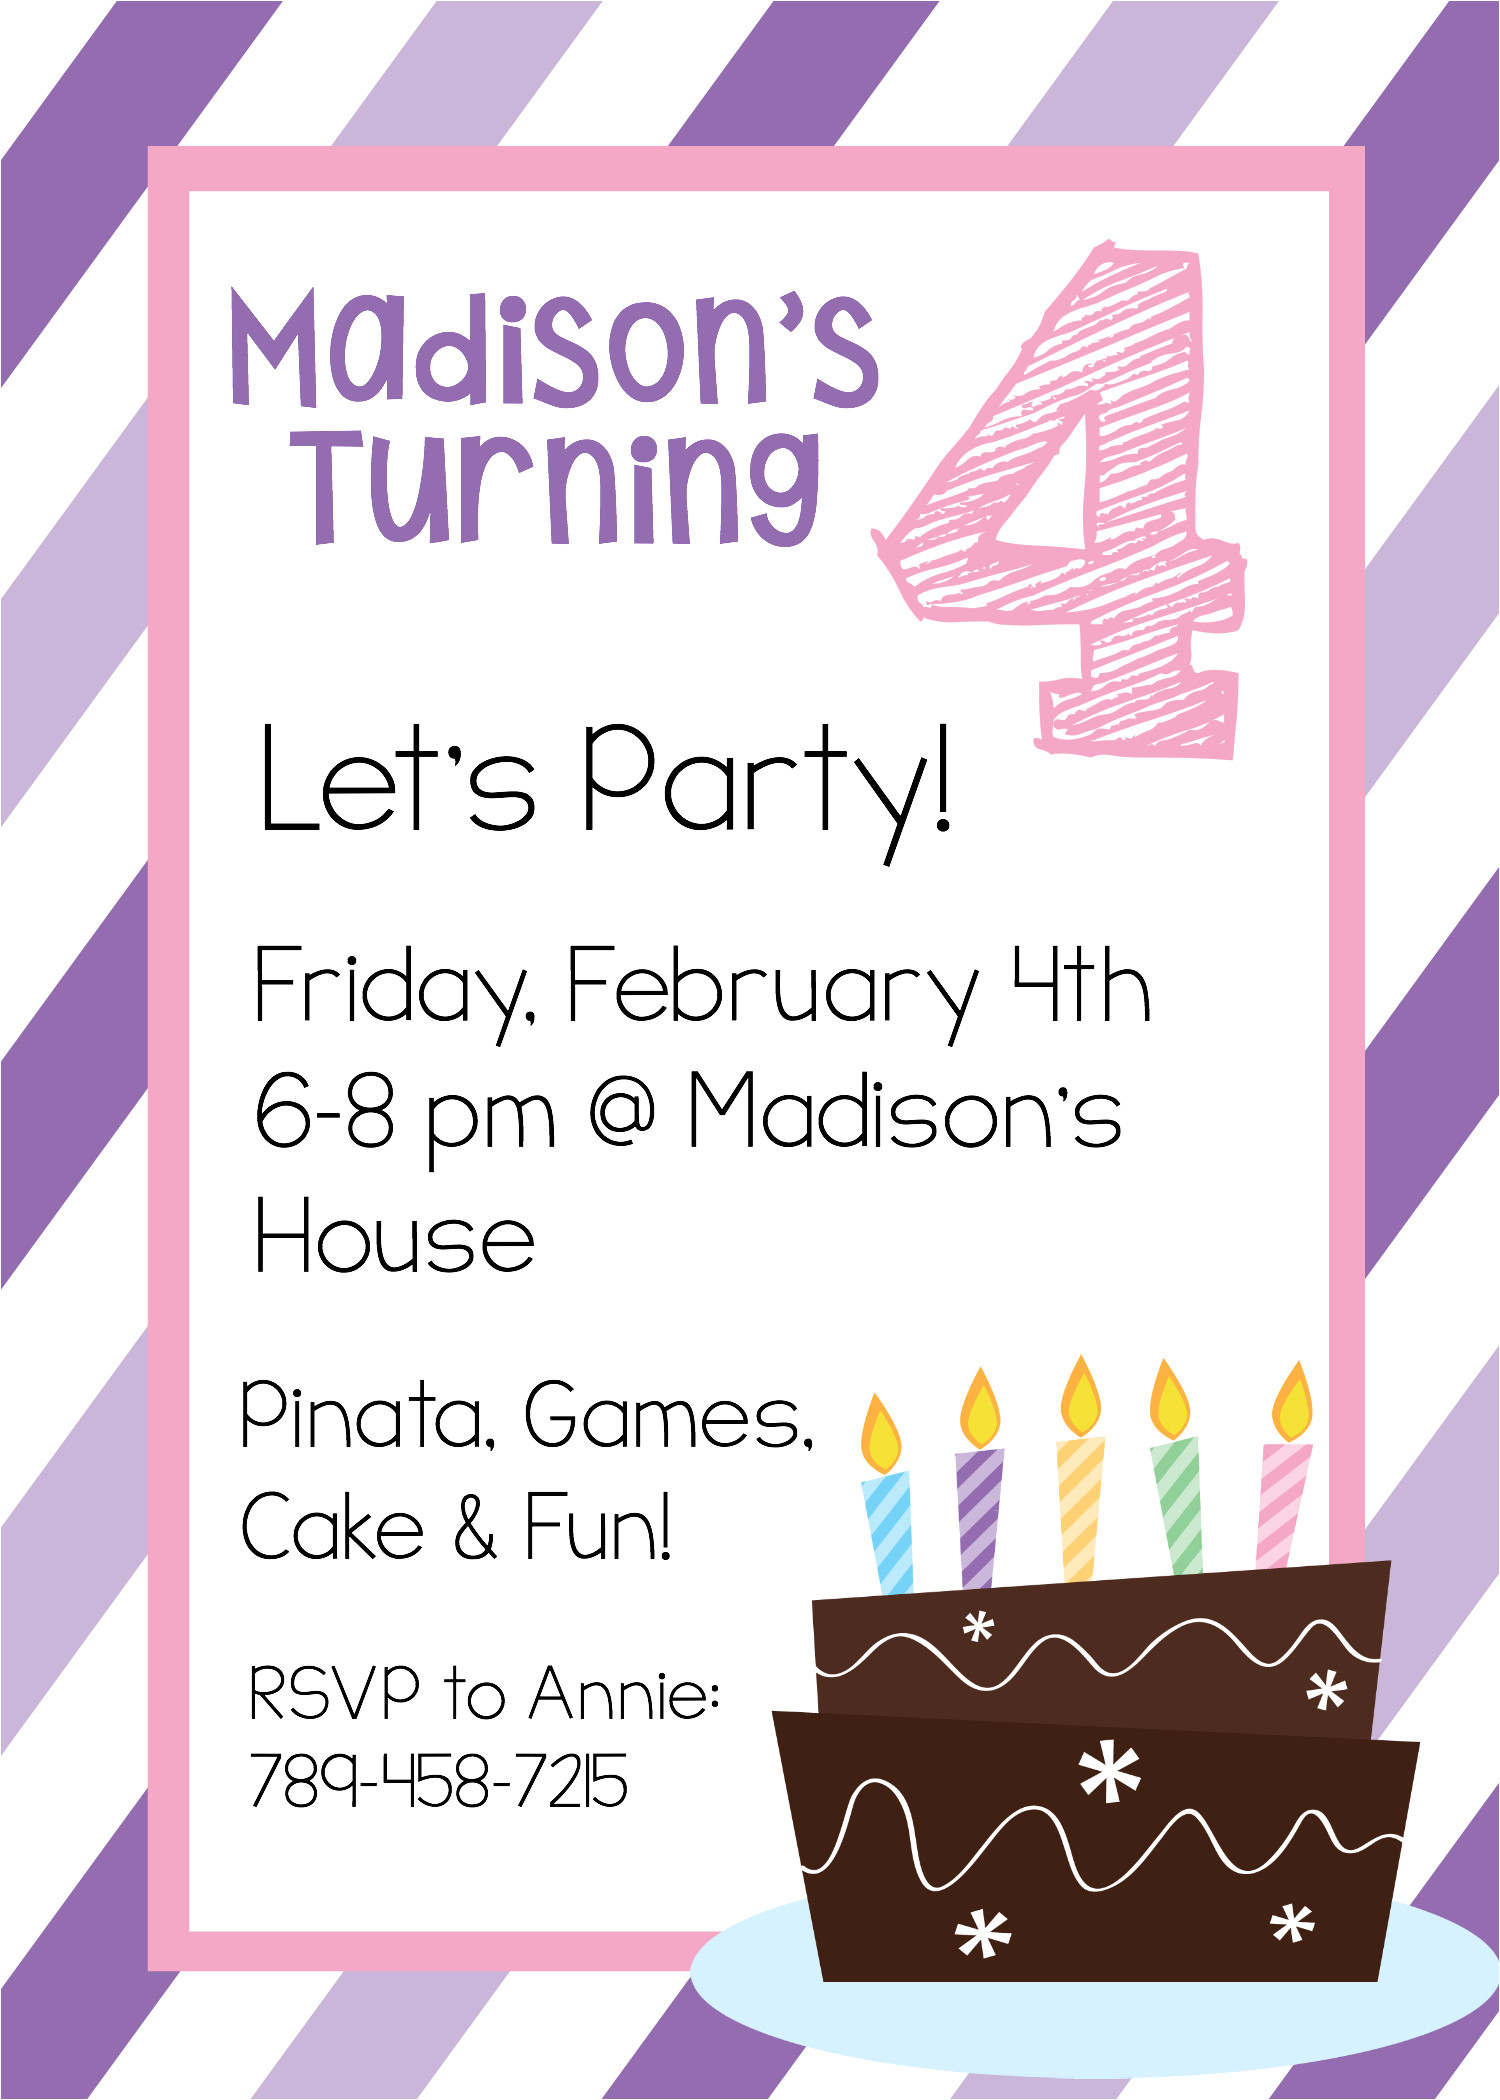 Birthday Party Invitation Template Free Online Free Printable Birthday Invitation Templates